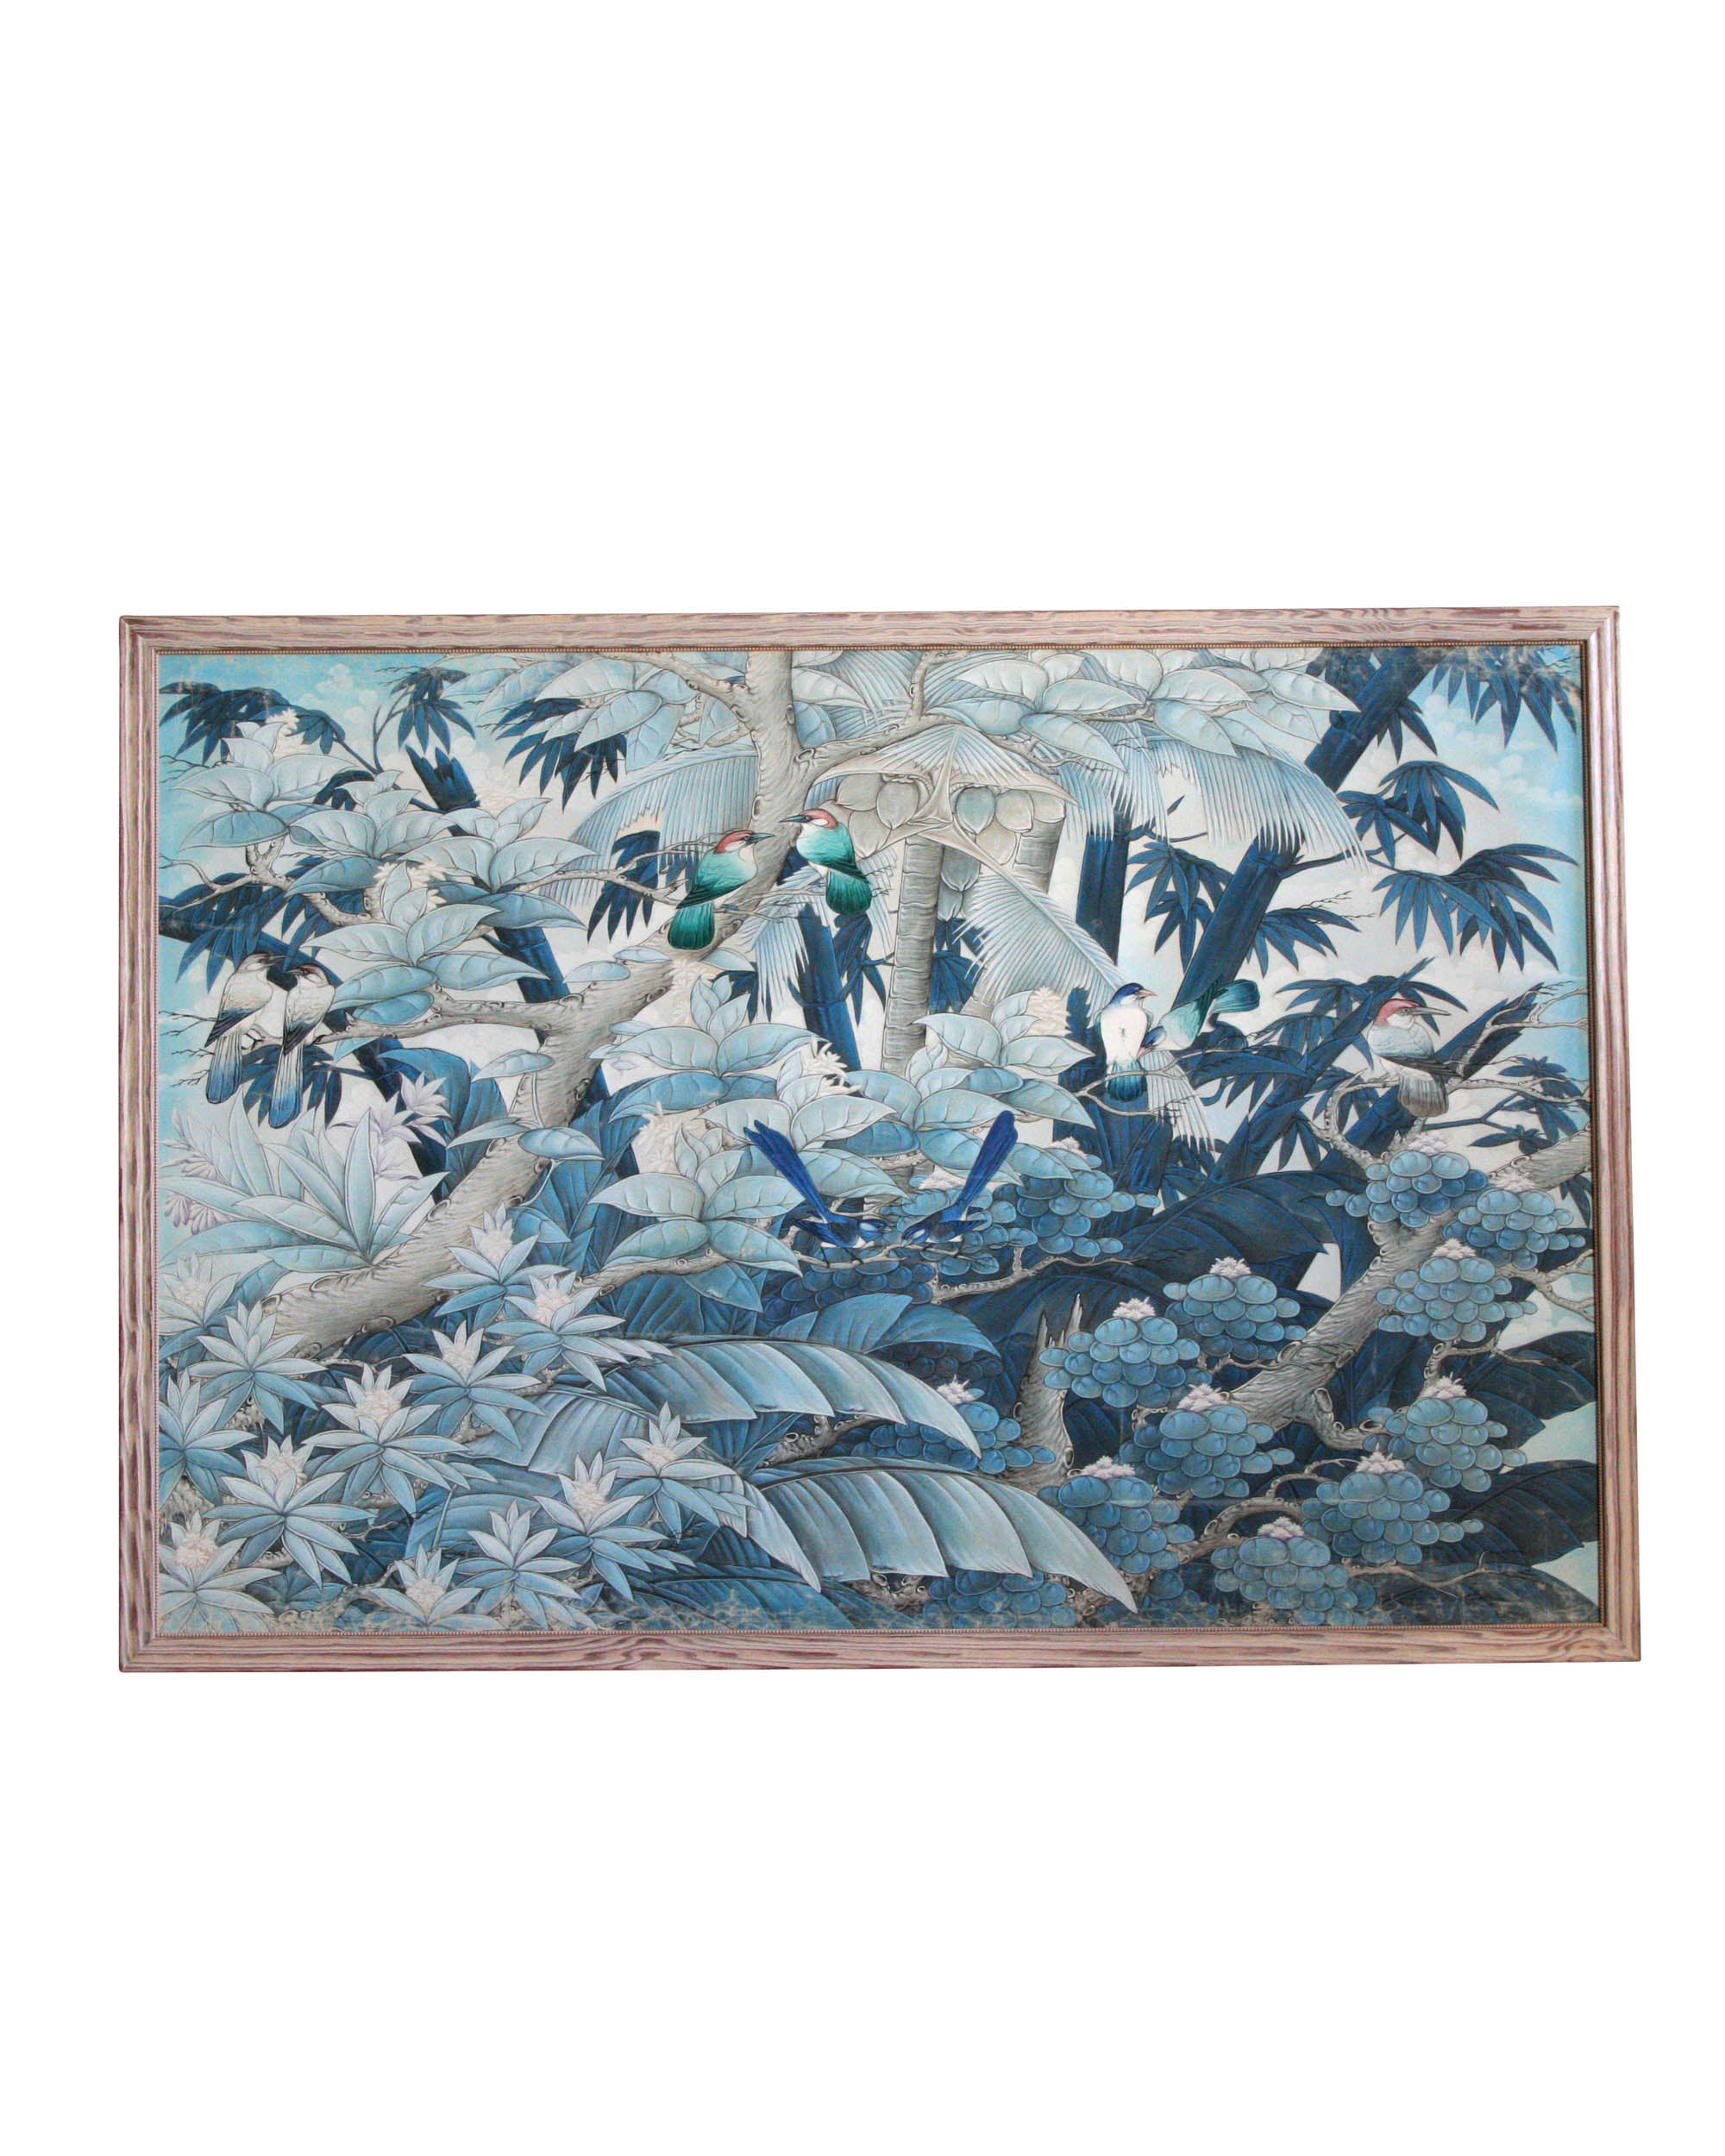 Oil on canvas of blue landscape with birds. 1970's